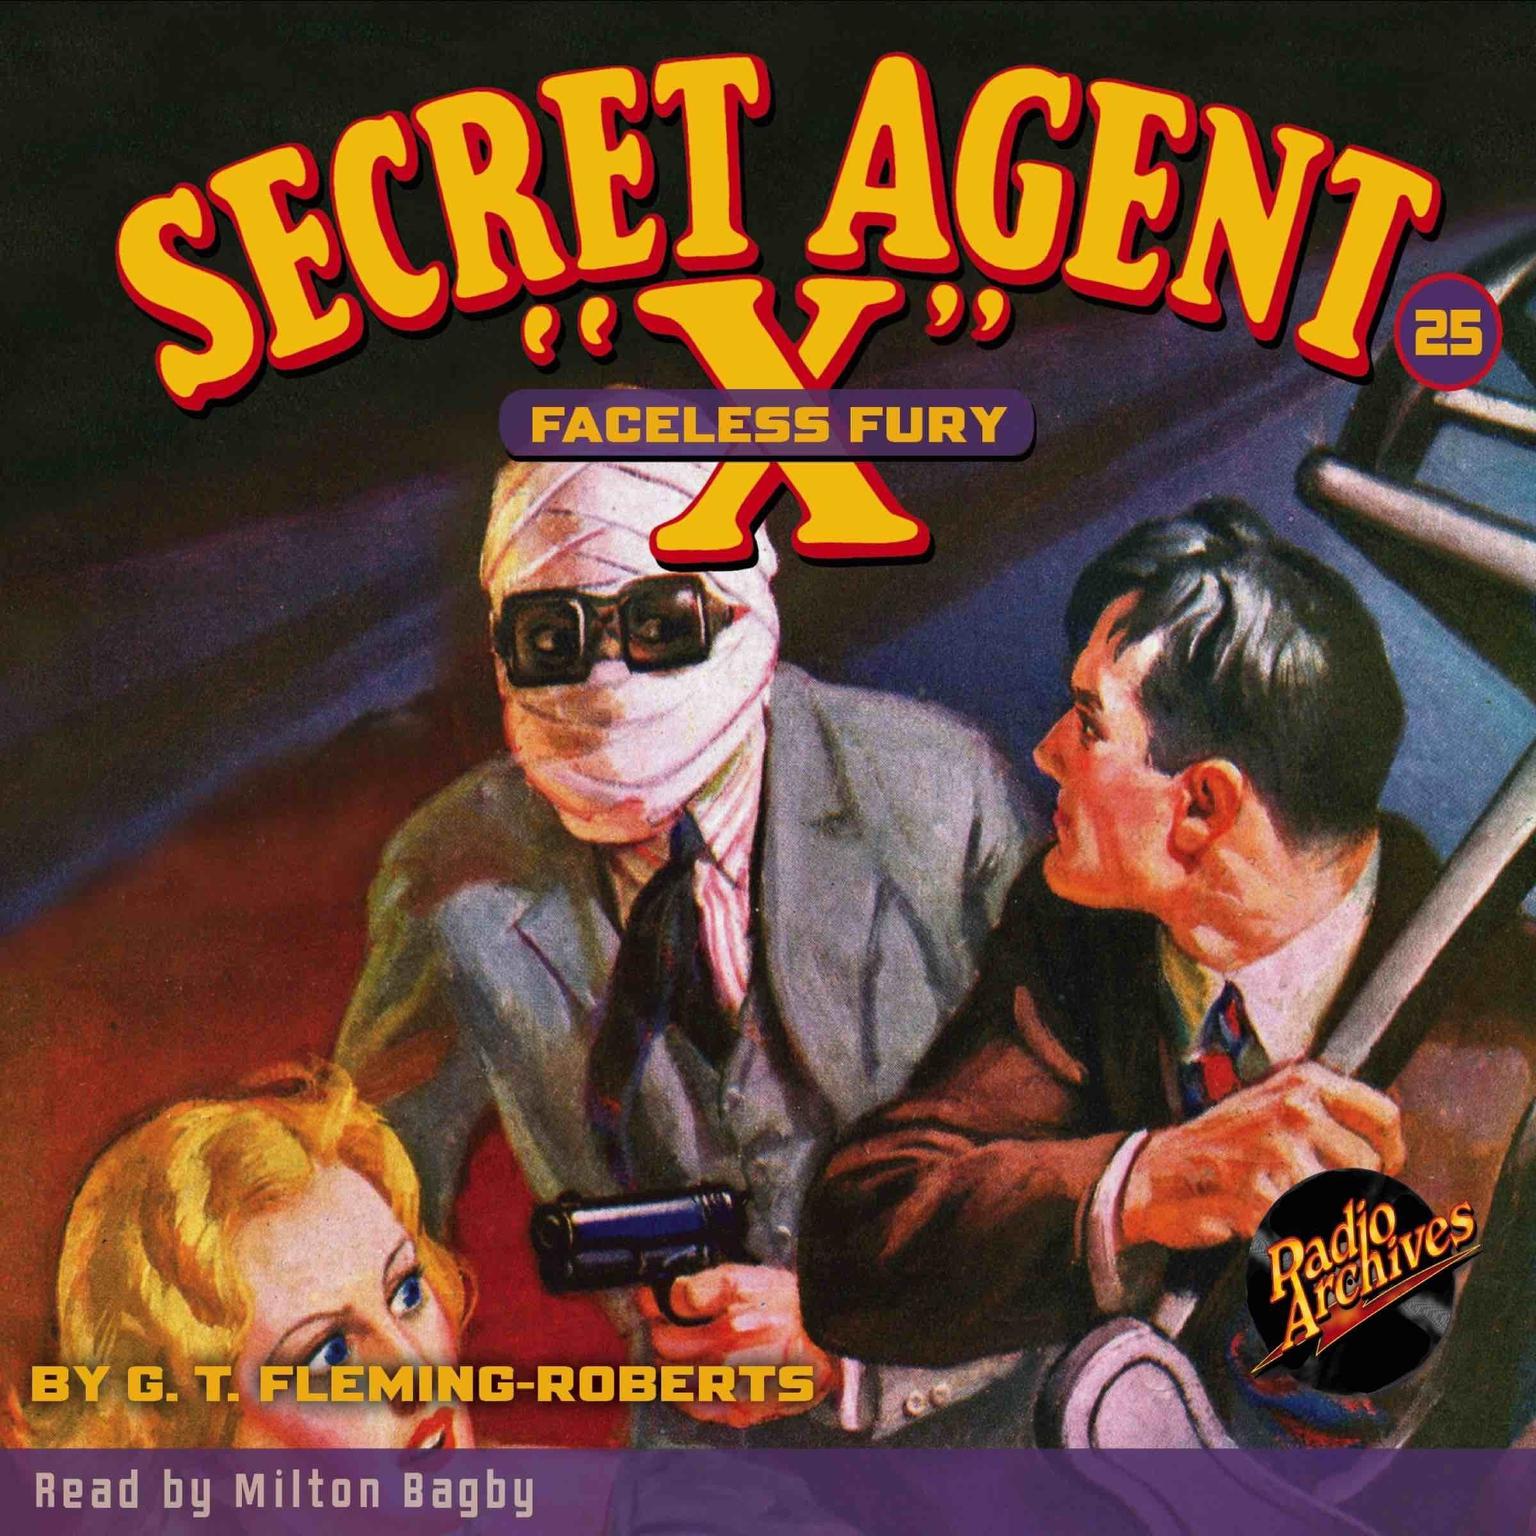 Secret Agent X: Faceless Fury Audiobook, by G. T. Fleming-Roberts